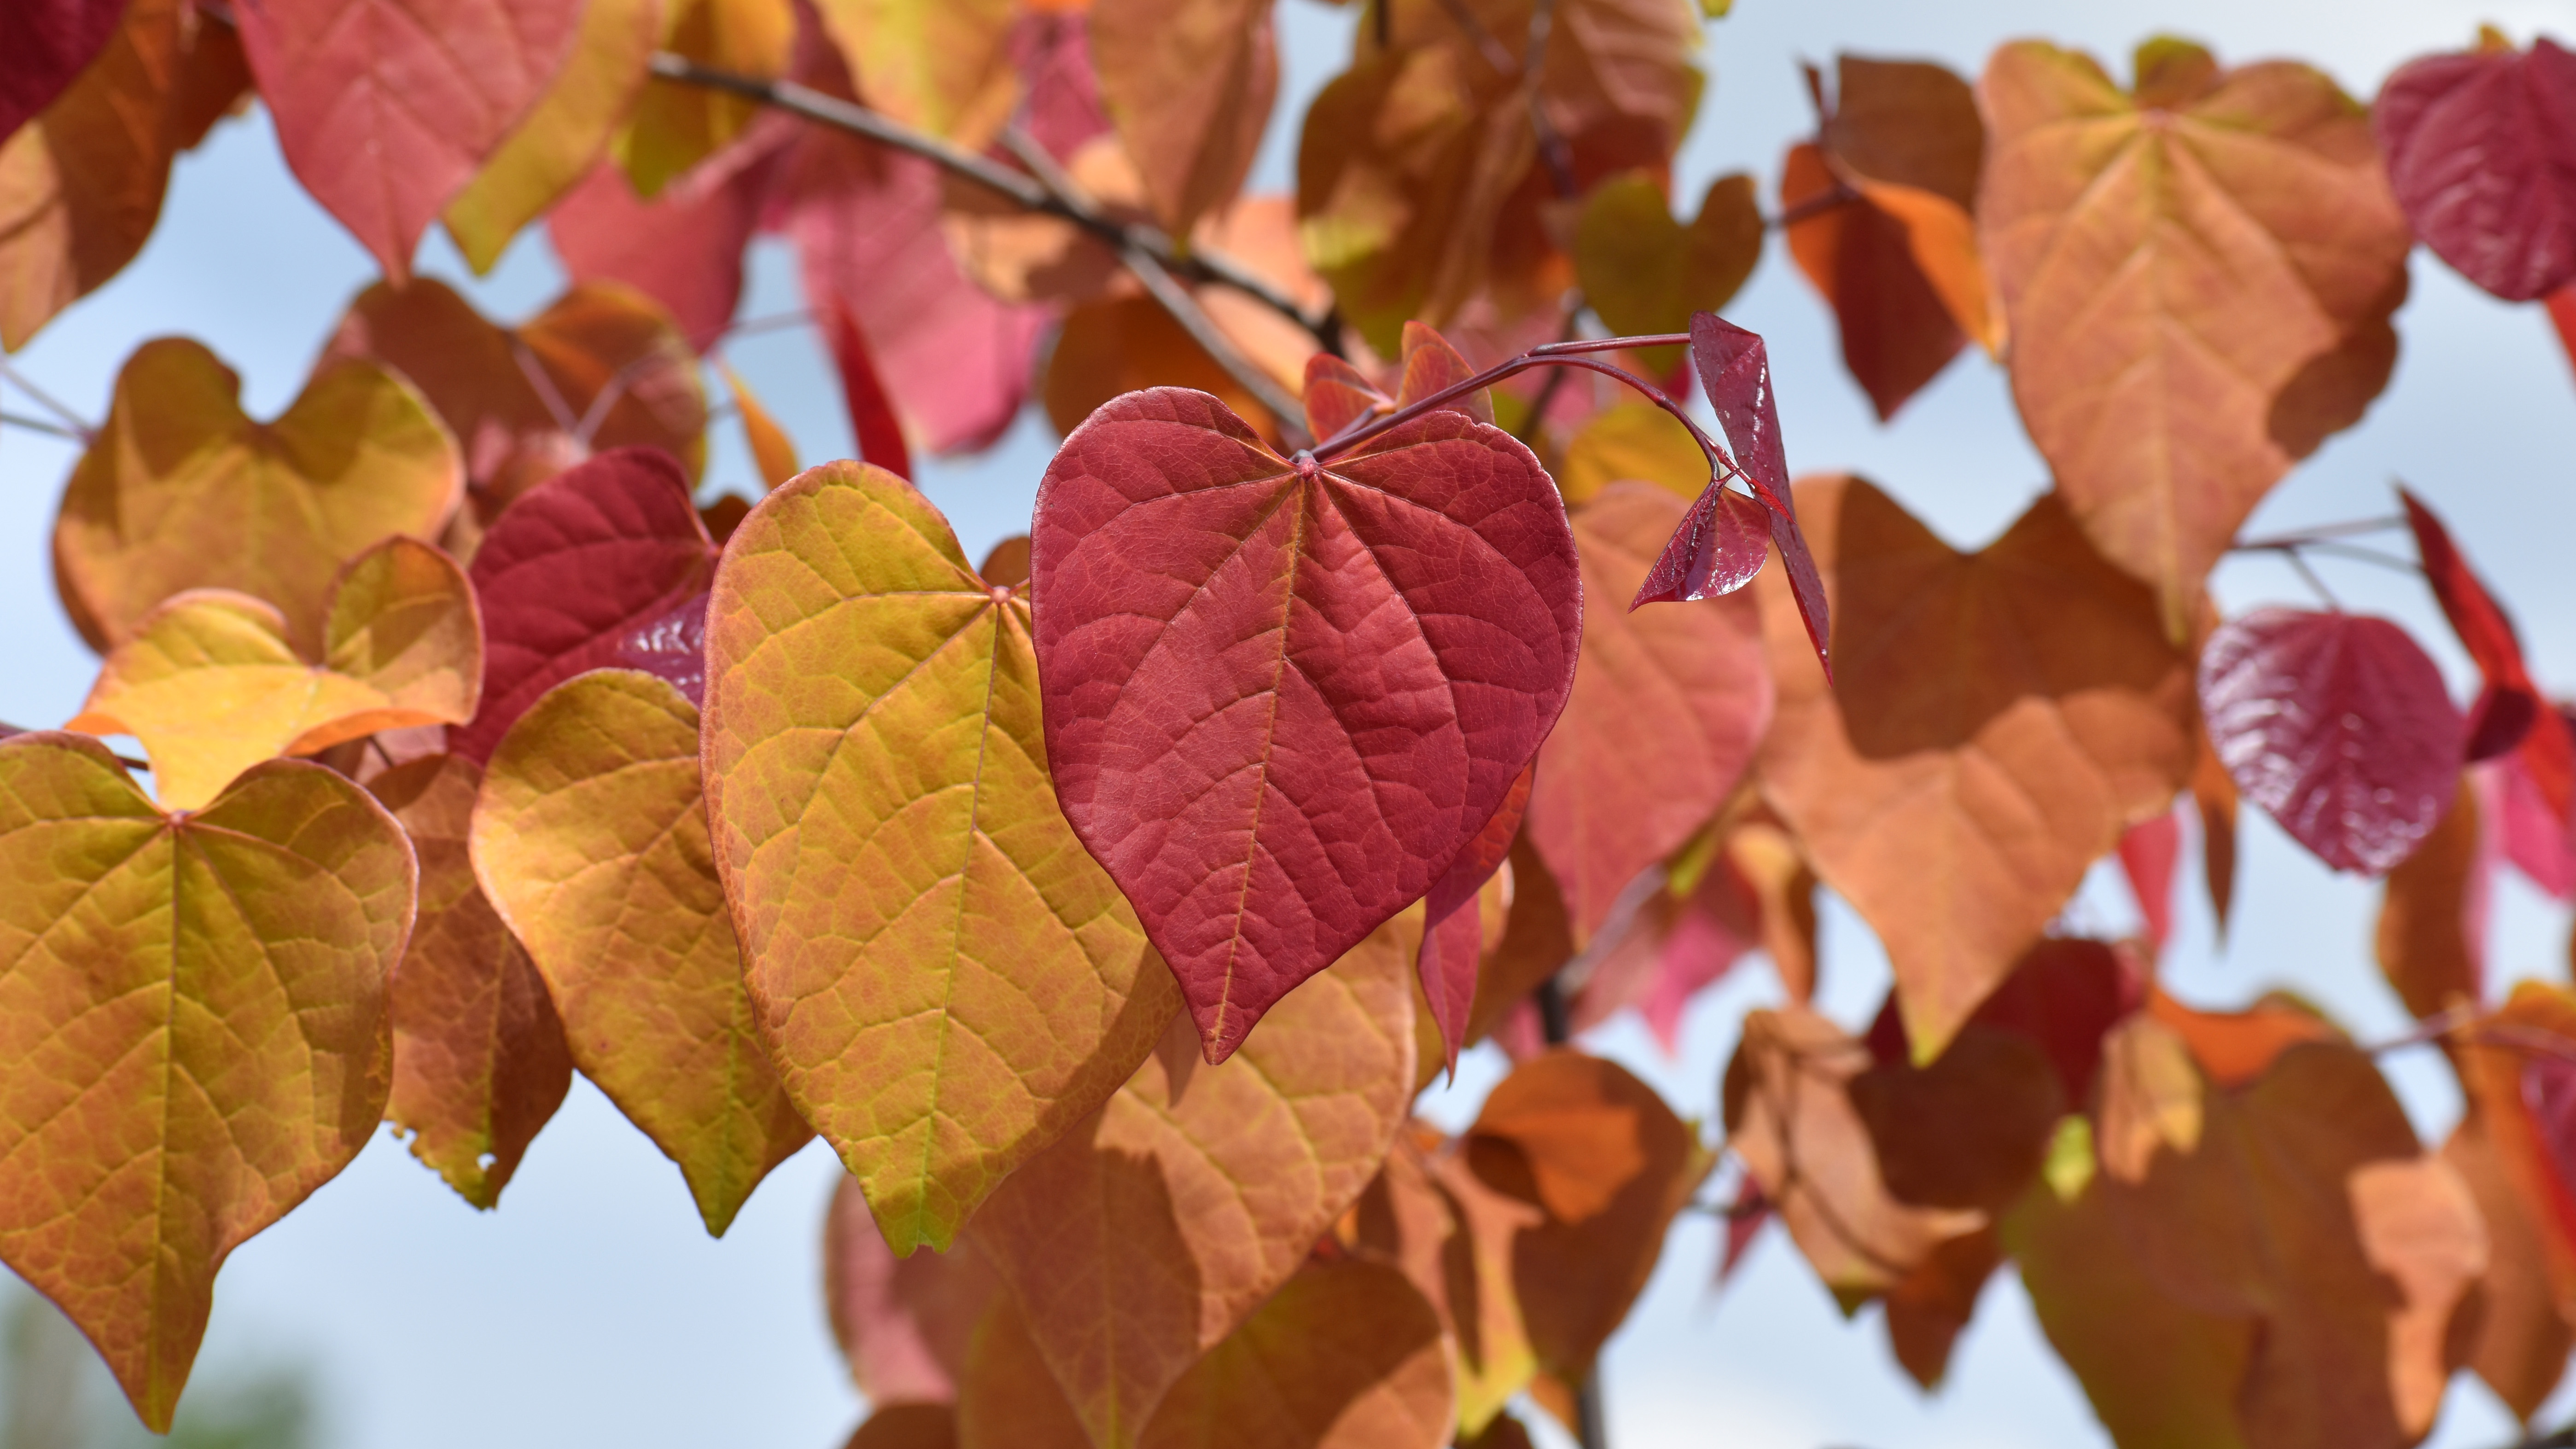 Cercis flamethrower: a superstar from previous rare plant auctions